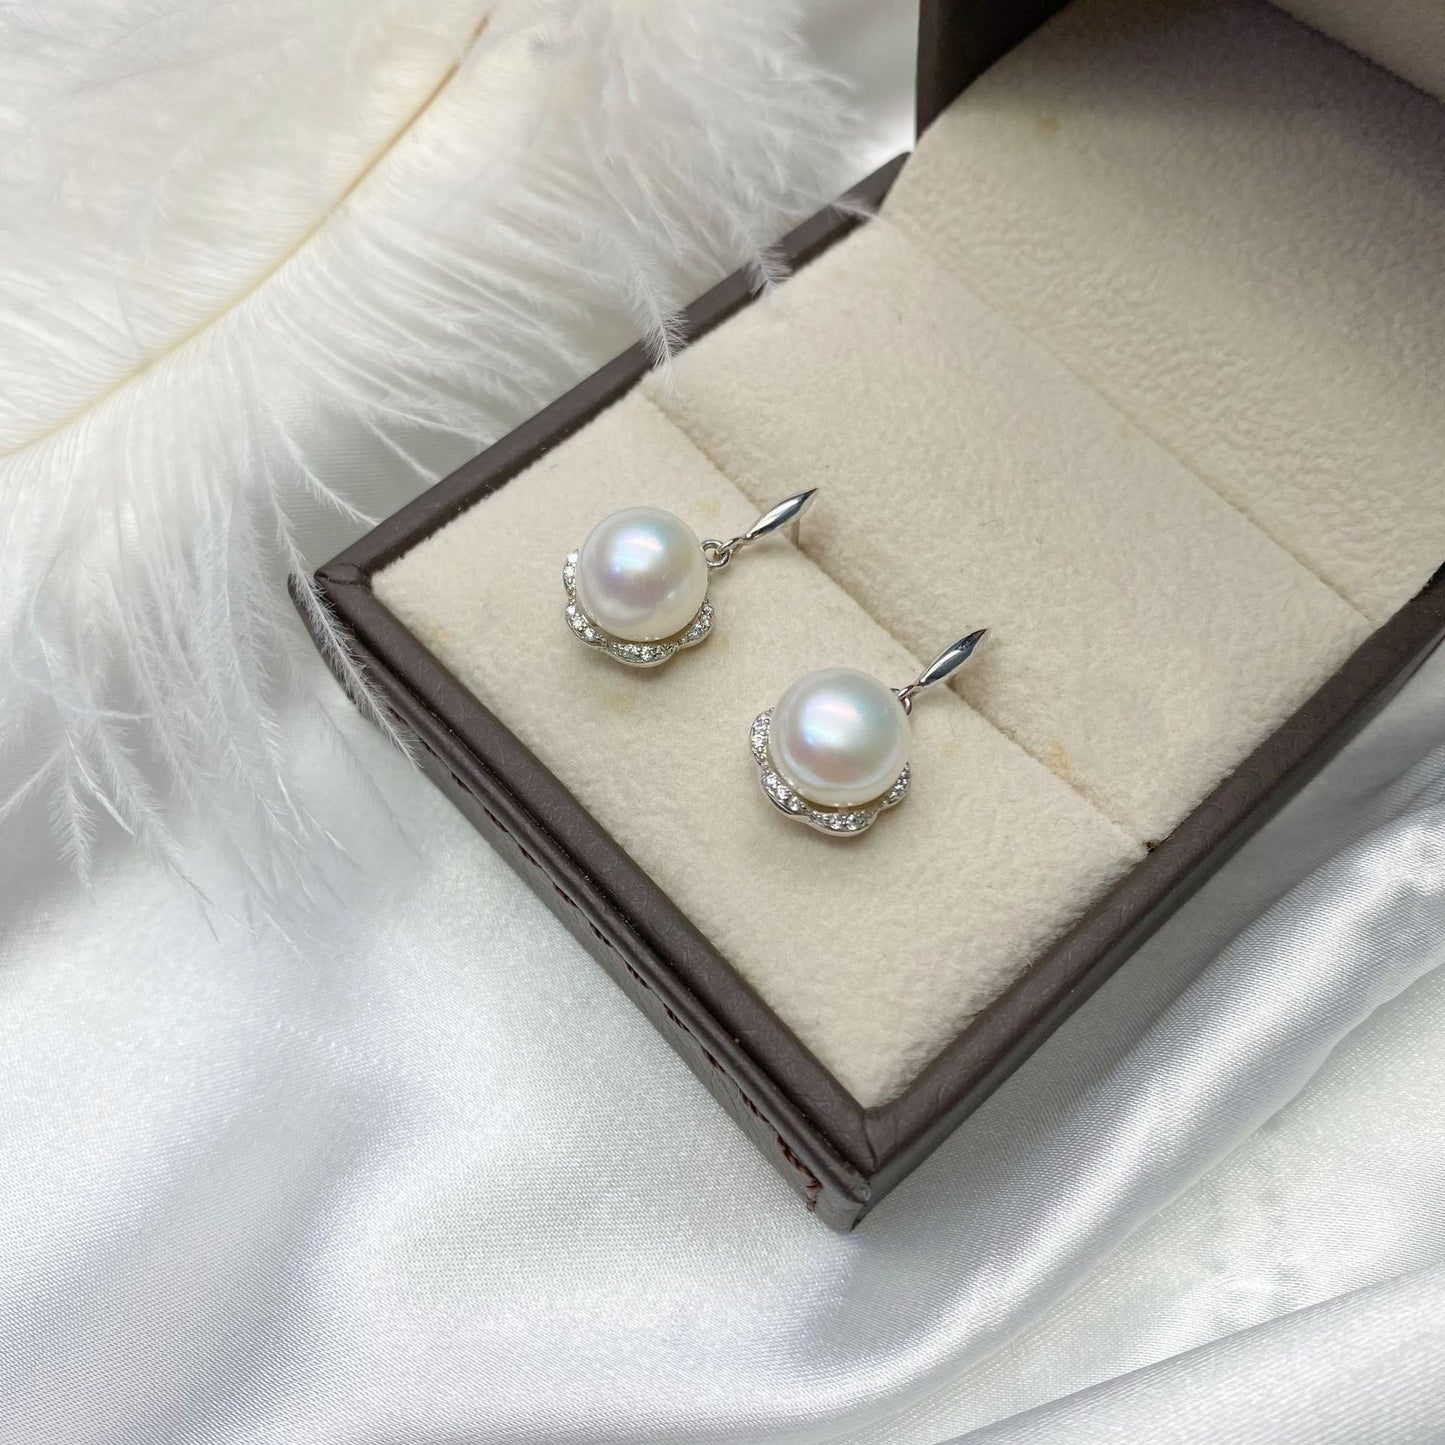 S925 silver Japanese freshwater pearl earrings (Shipping not included)